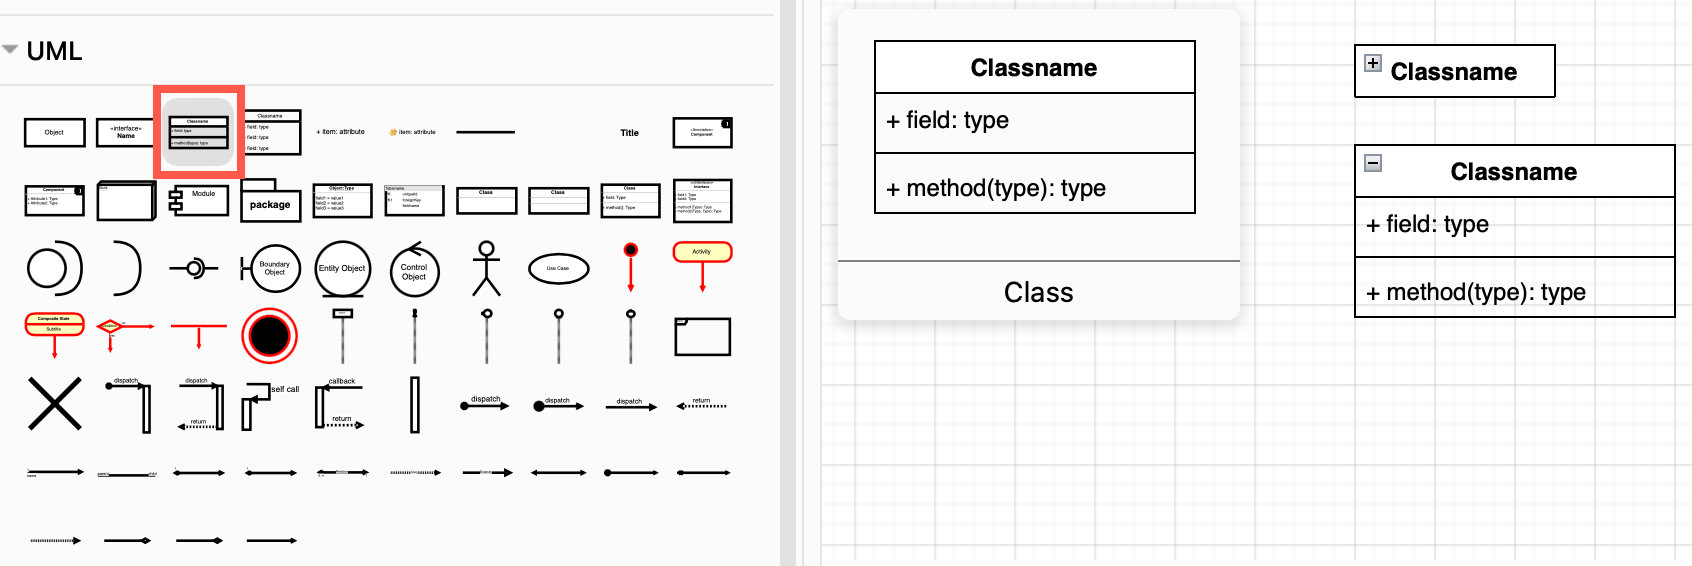 The first few class shapes in the UML shape library are collapsible